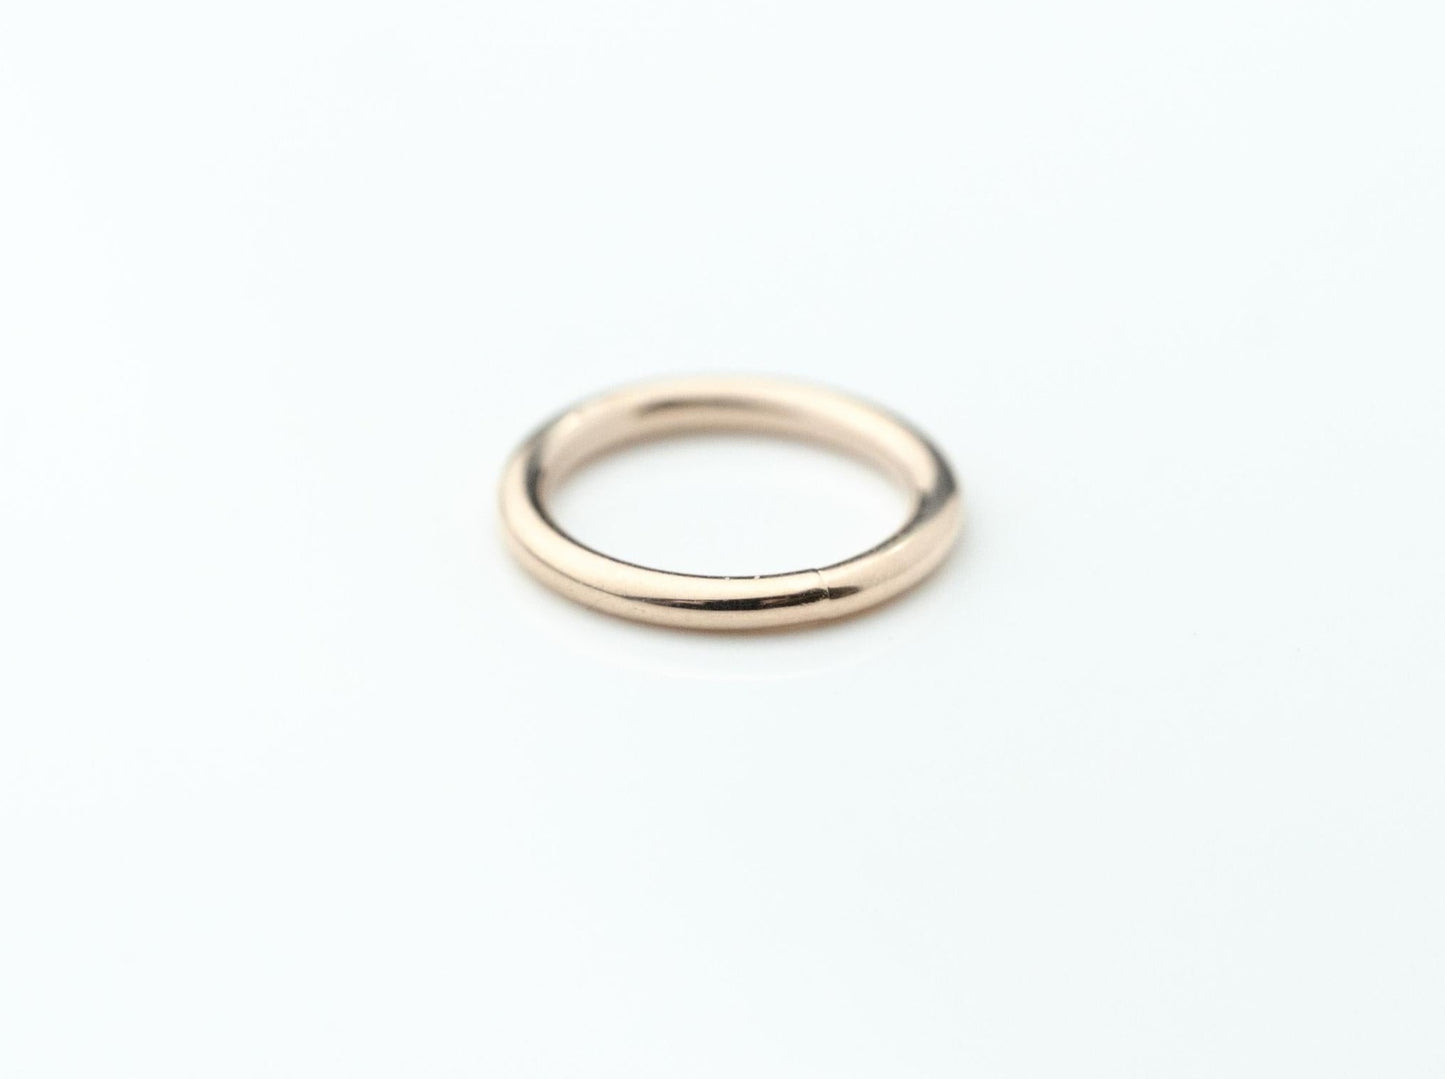 Seam Ring in 14k Rose Gold by BVLA